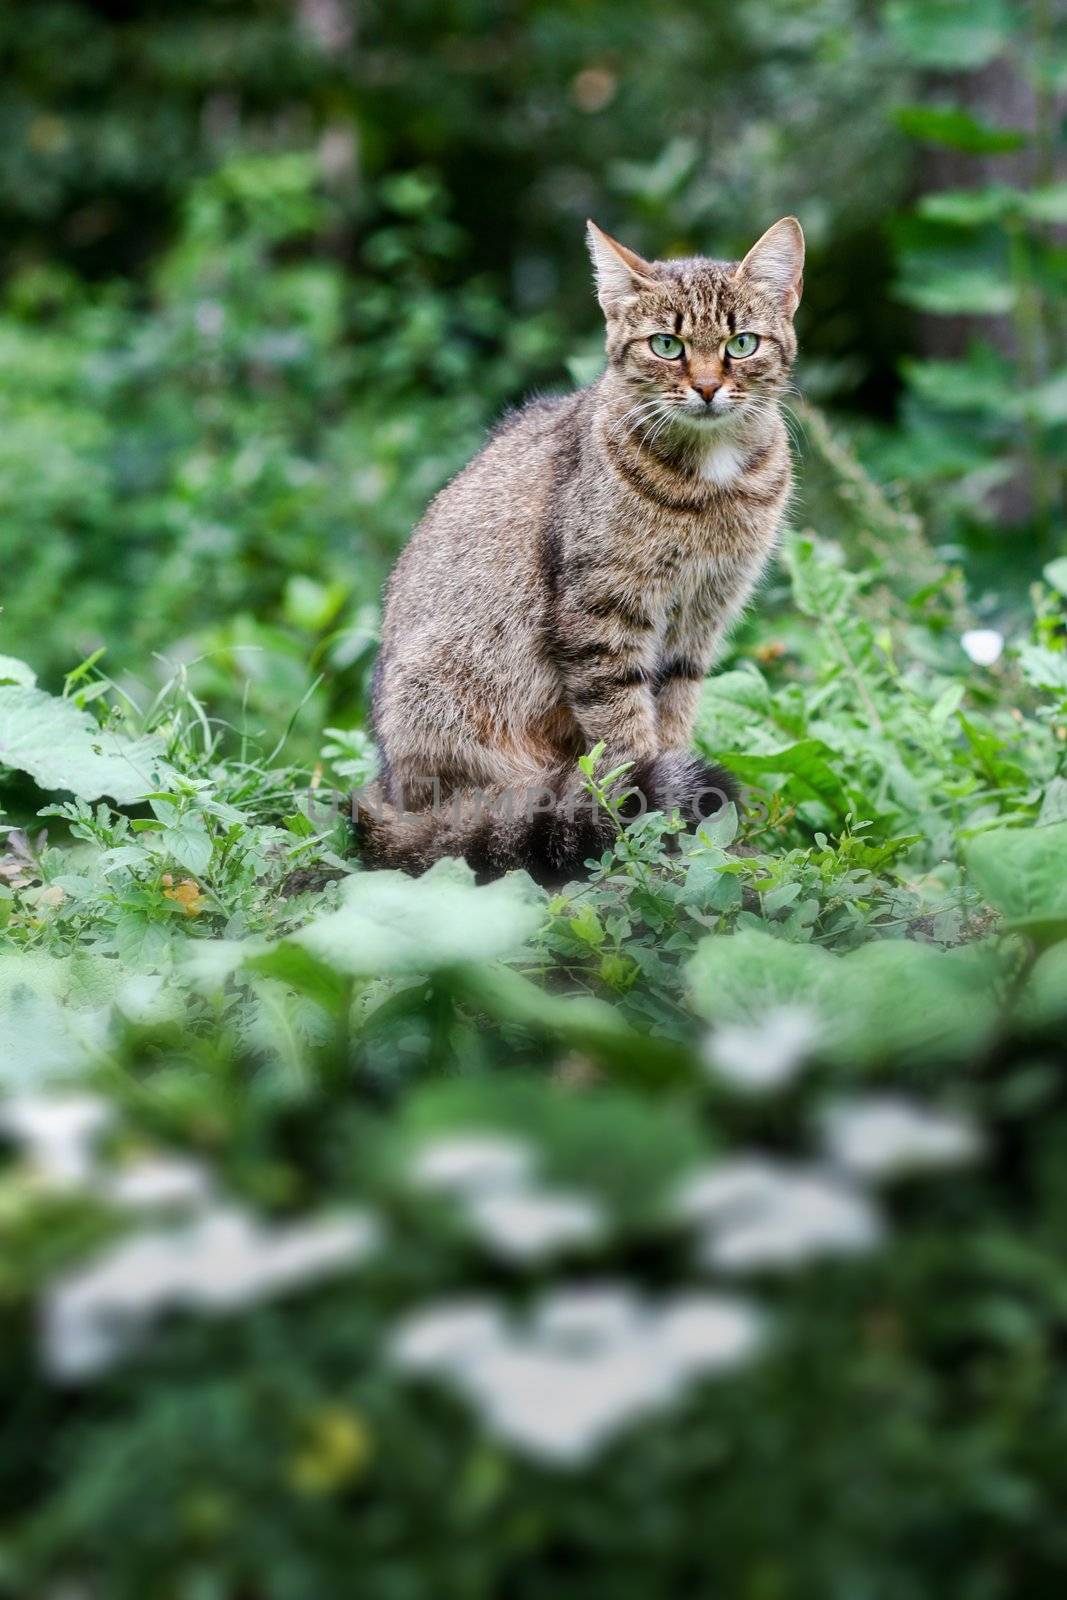 An image of a cat. Outdoor on green grass